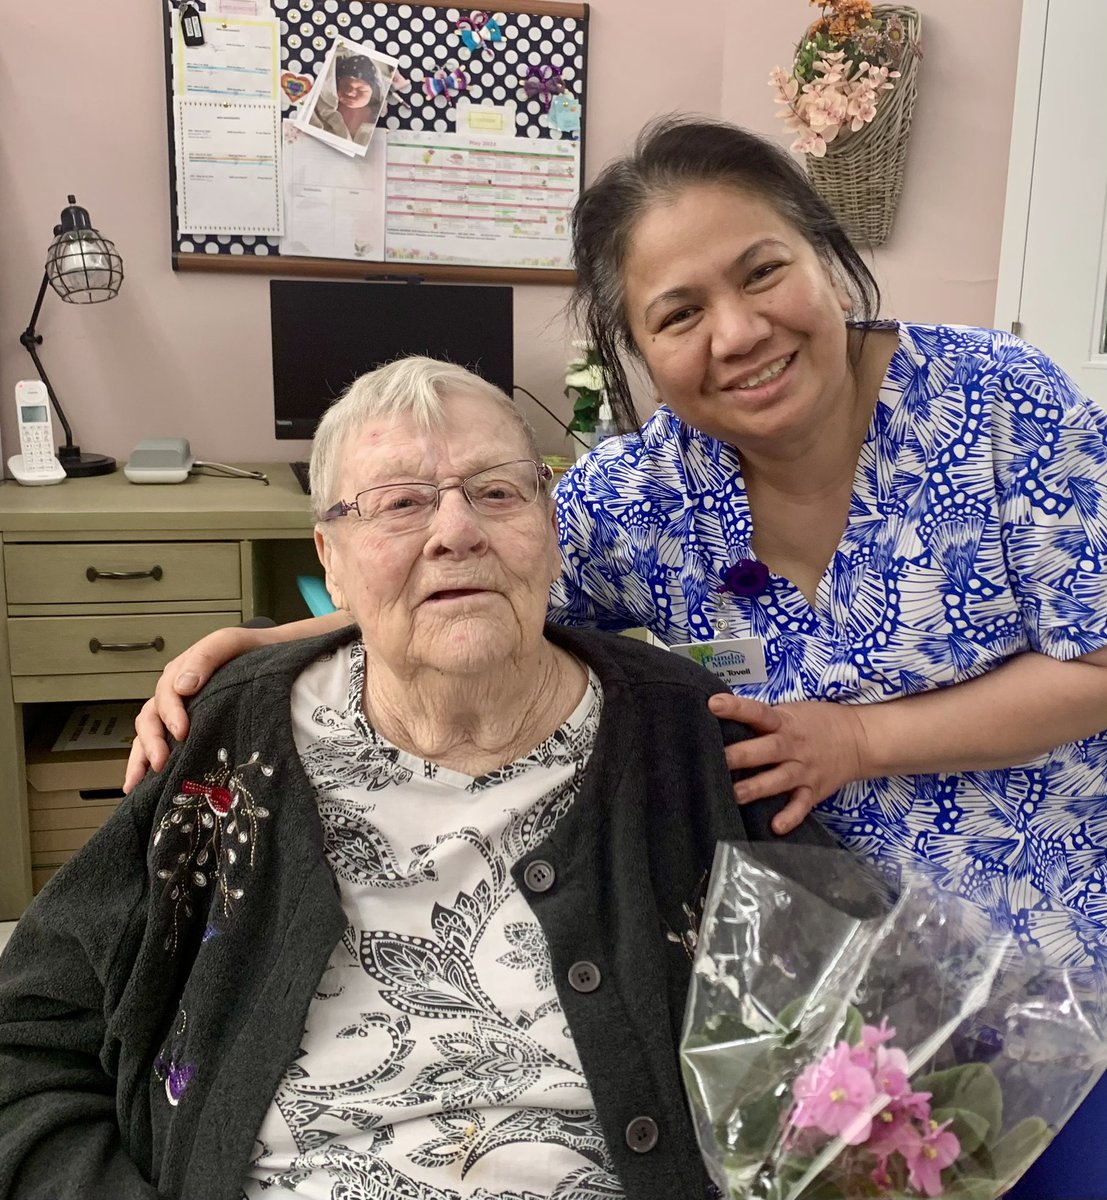 Our PSW Virginia presented resident Shirley with flowers 💐 to celebrate her career as a PSW   #PSWDay 💙💚